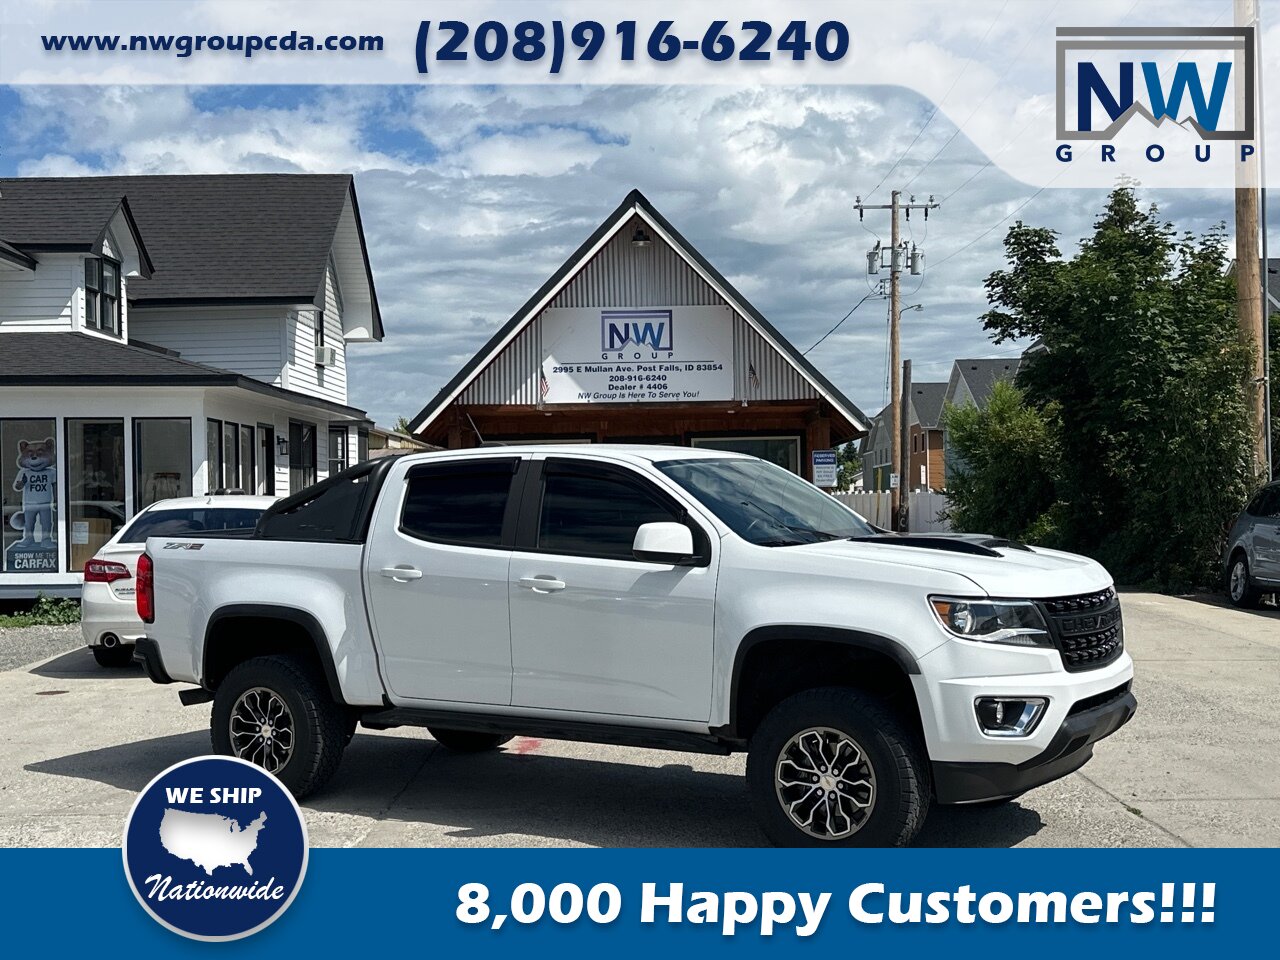 2019 Chevrolet Colorado ZR2.  19k miles, 4x4, Front and Rear Lockers! - Photo 1 - Post Falls, ID 83854